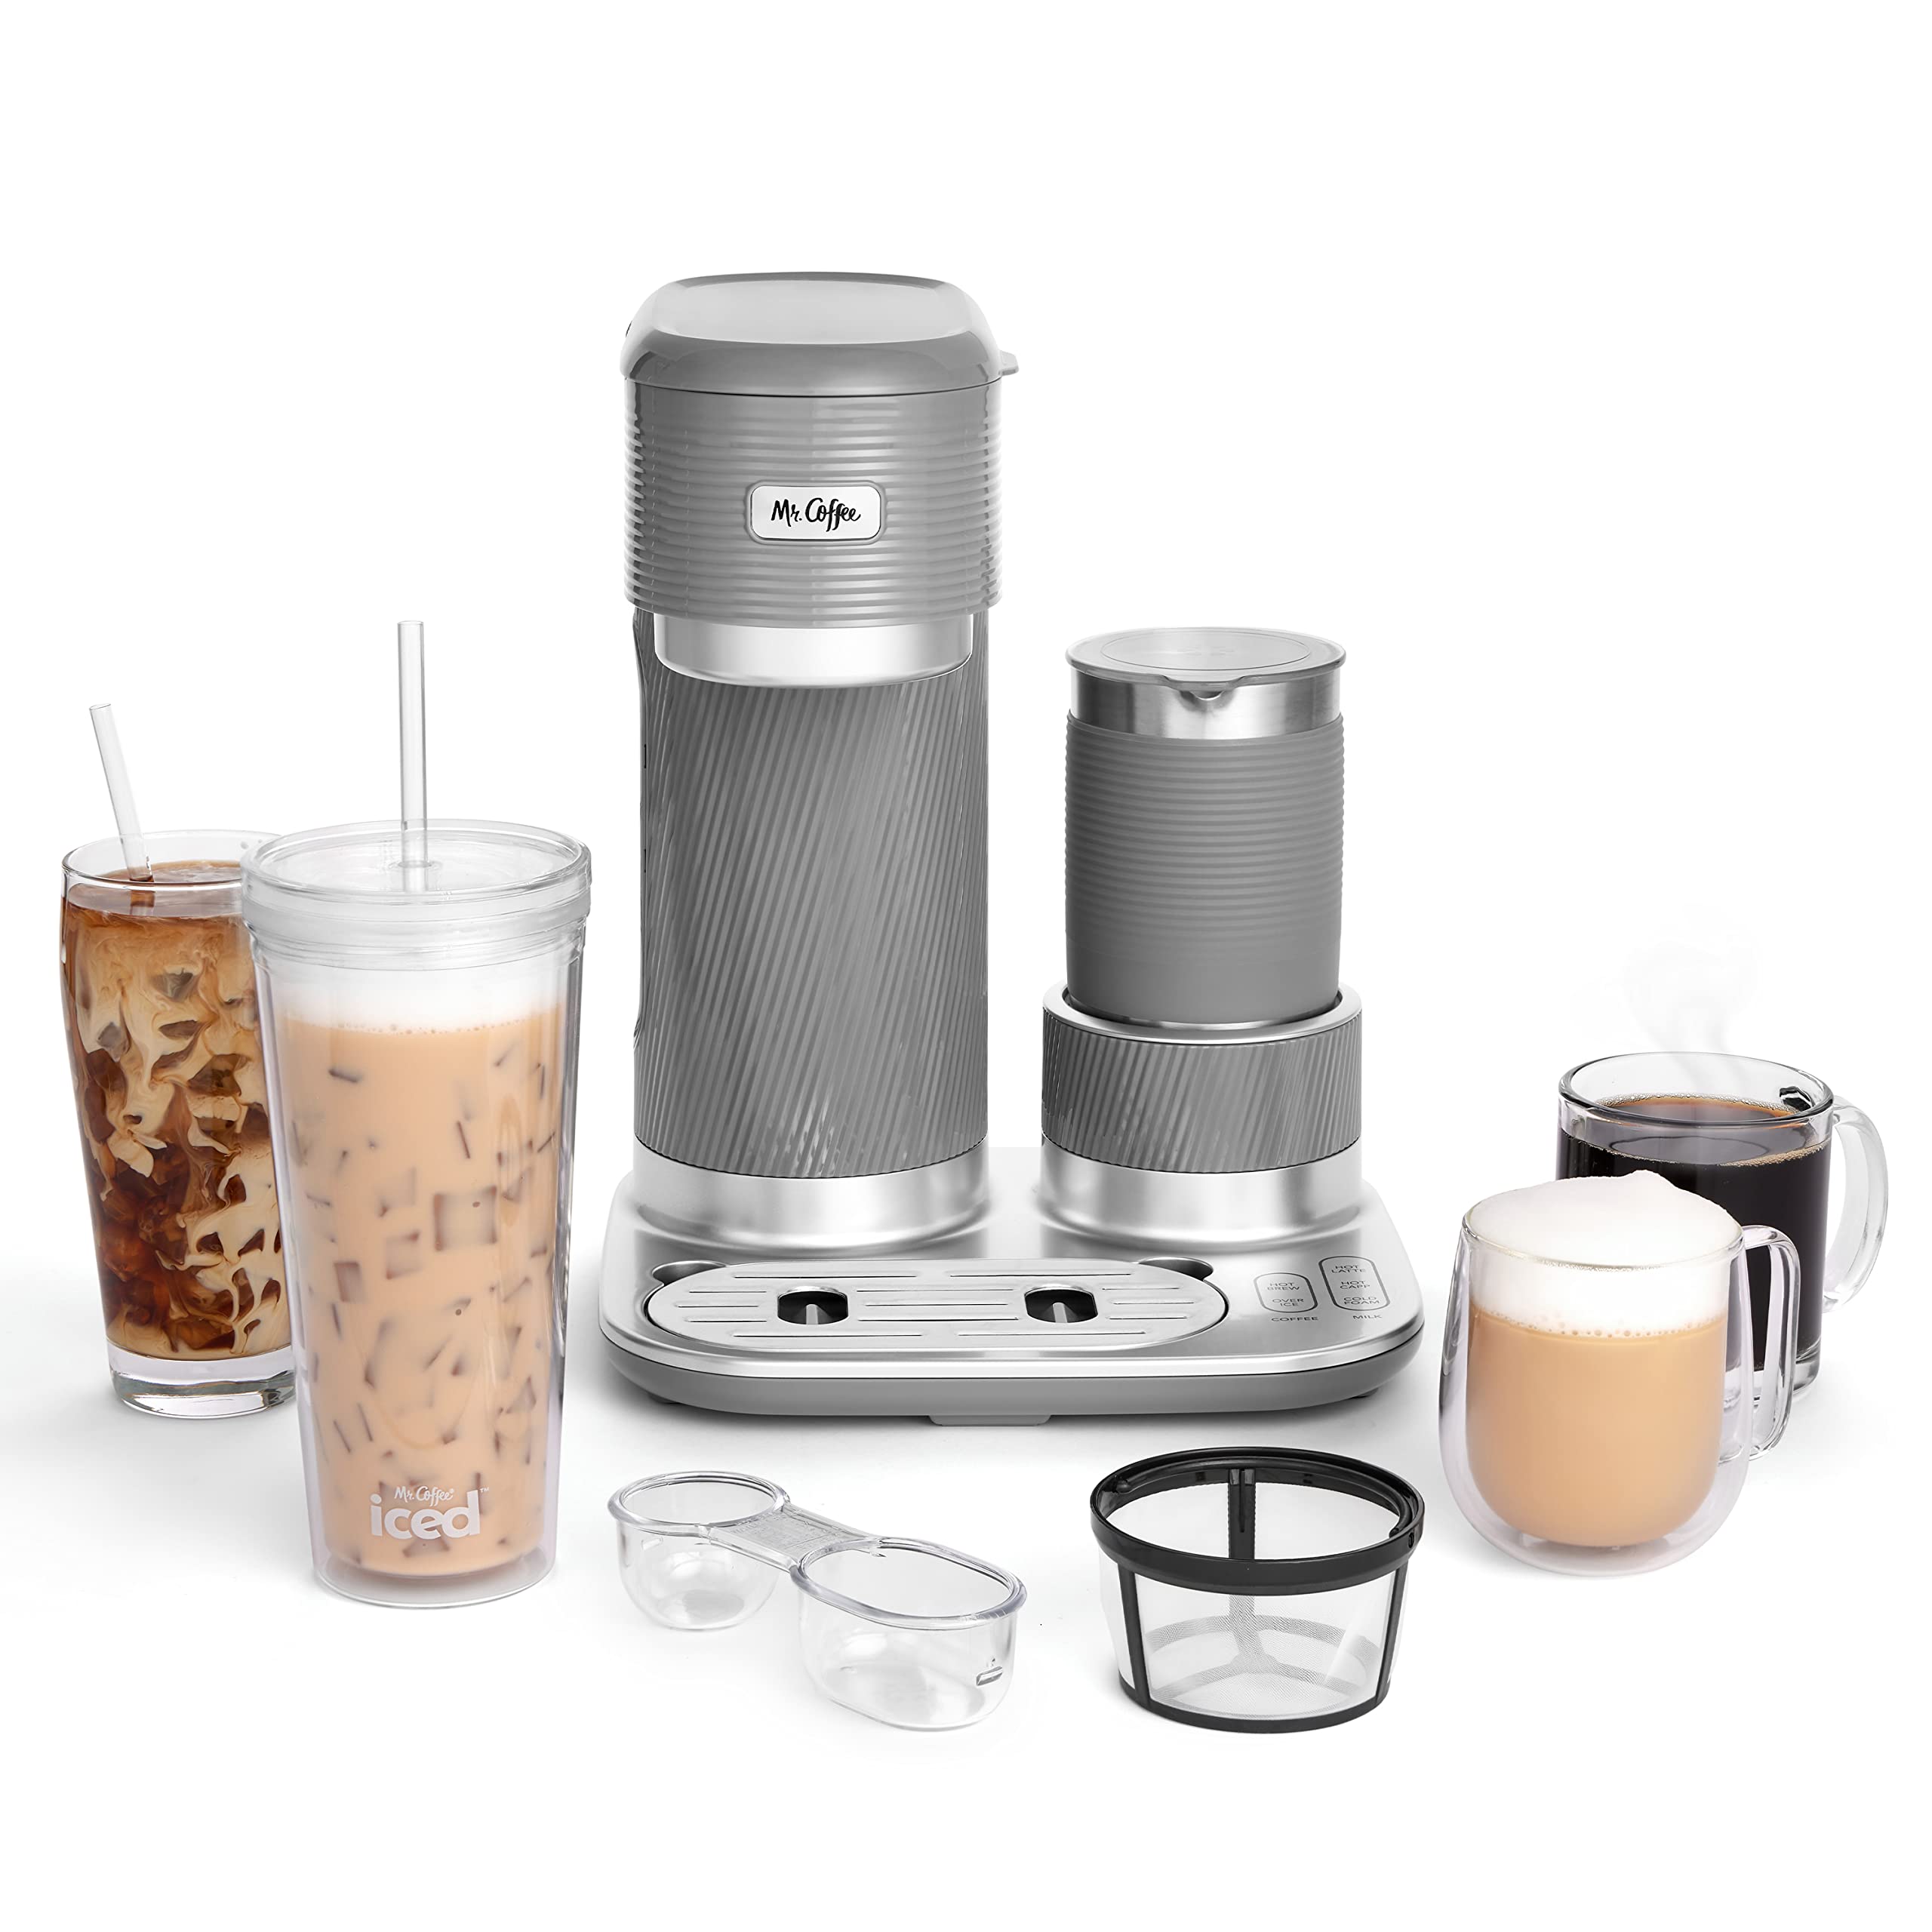 Mr. Coffee 4-in-1 Single-Serve Latte Lux, Iced, and Hot Coffee Maker with Milk Frother,22 ounces